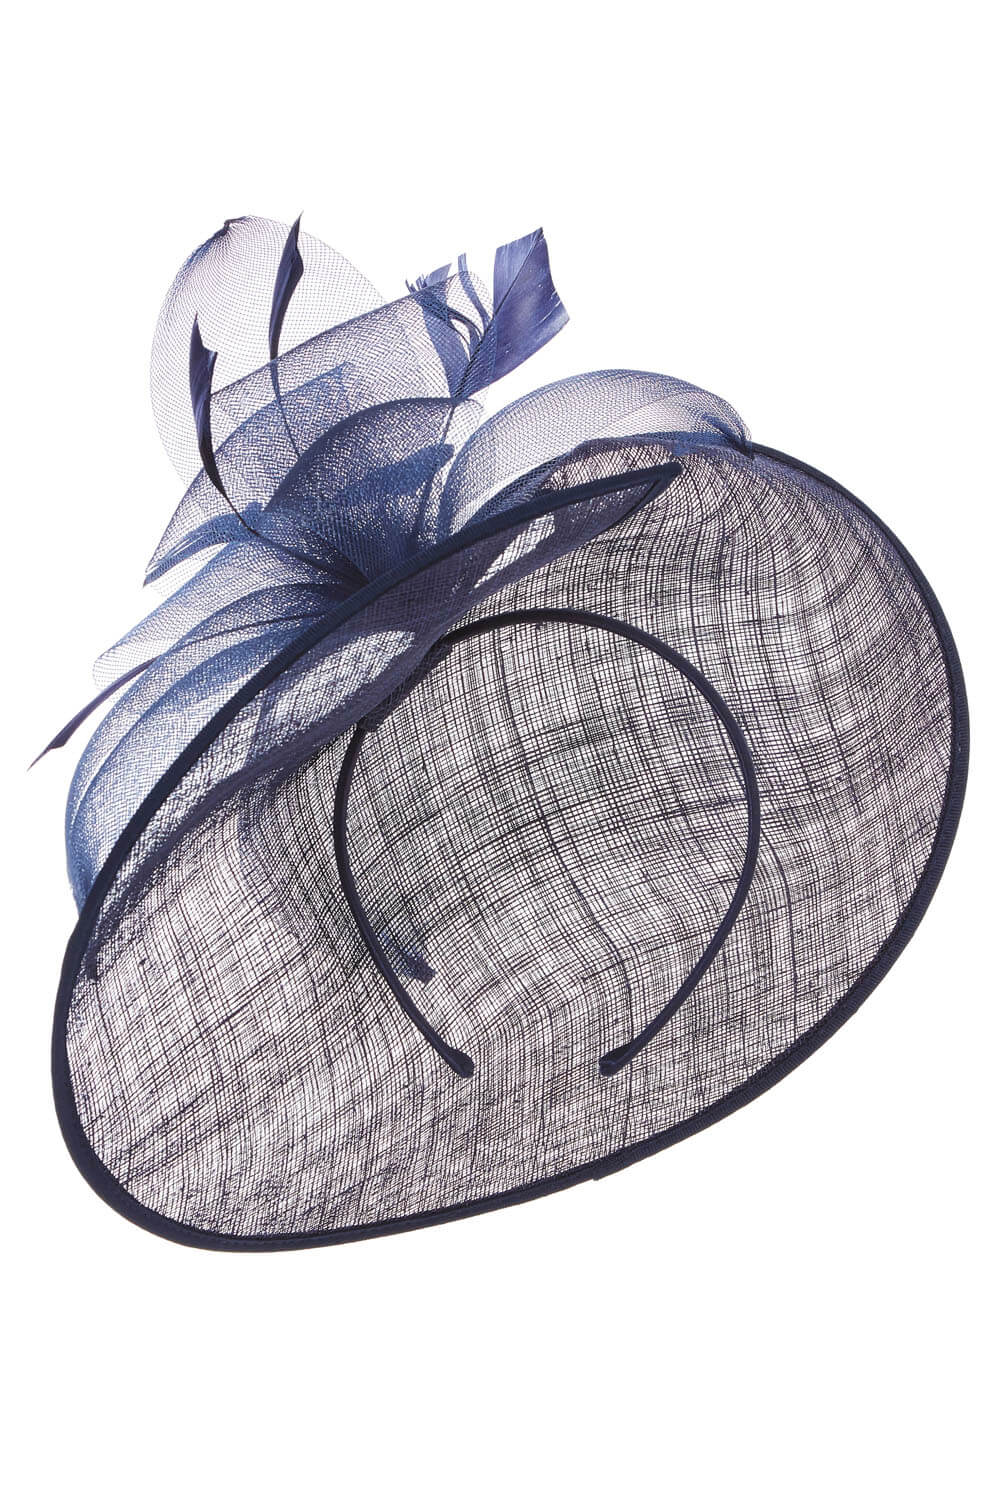 Feather Detail Disc Fascinator 